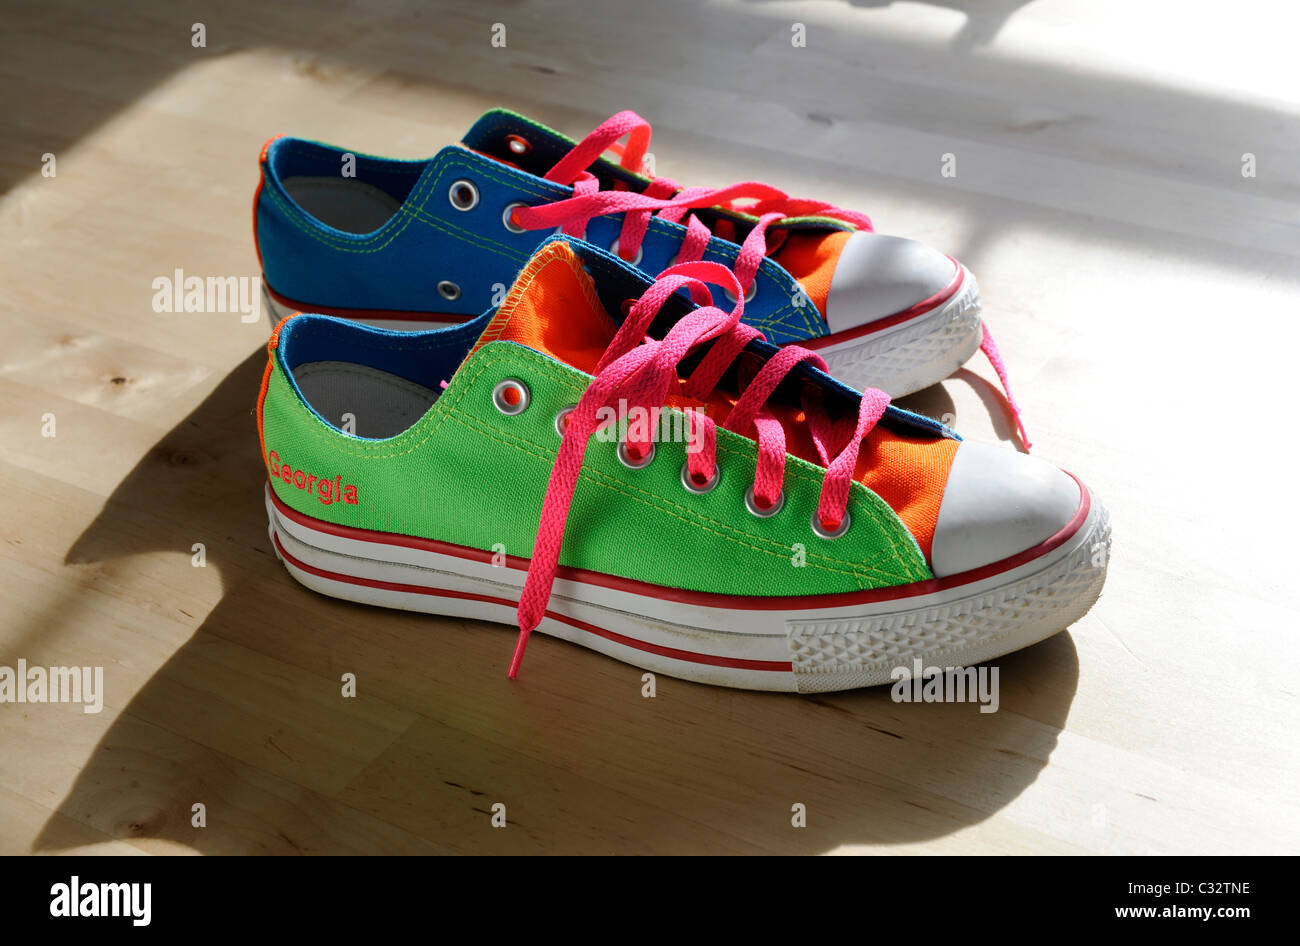 New Converse All Star sneakers ordered from website where user picks what  colors to combine Stock Photo - Alamy